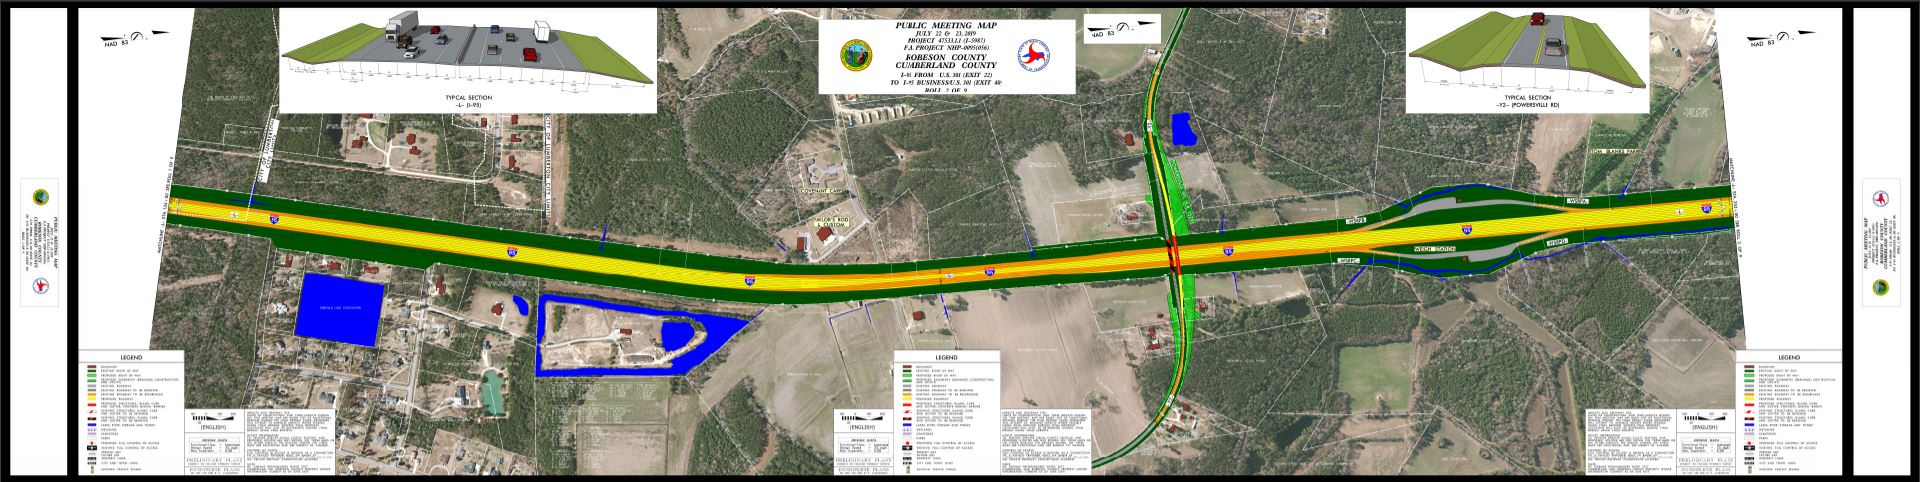 Map 2 of I-5987 Road Widening